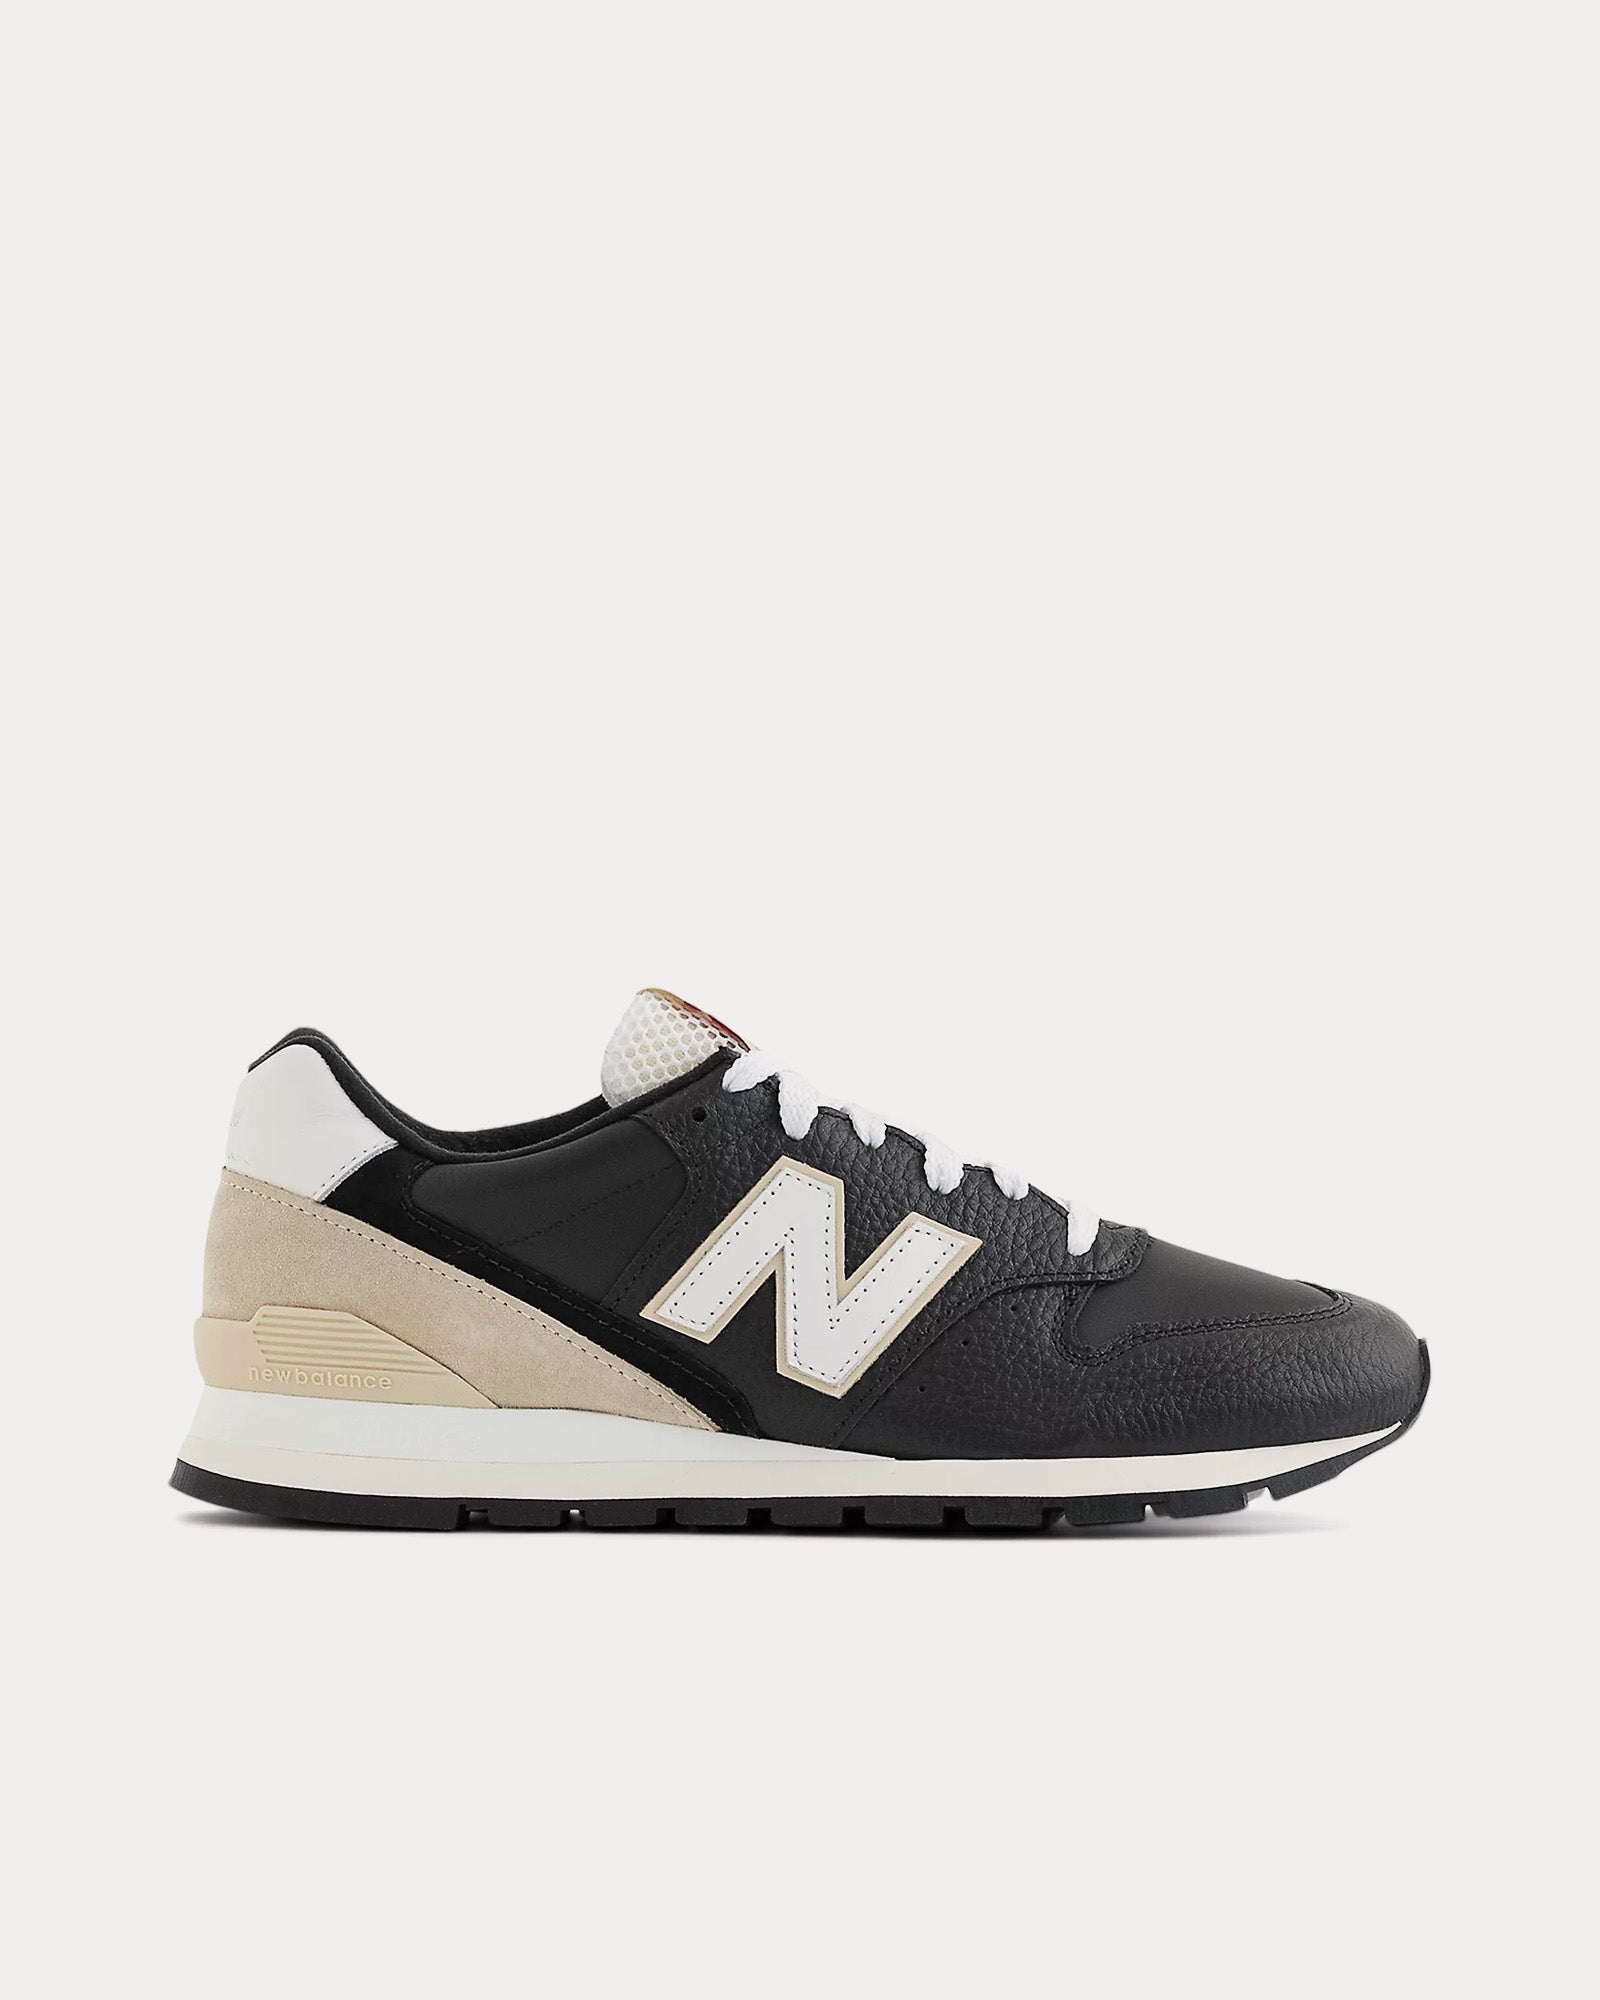 New Balance x Aime Leon Dore - Made in USA 996 Black / Sandstone / White Low Top Sneakers